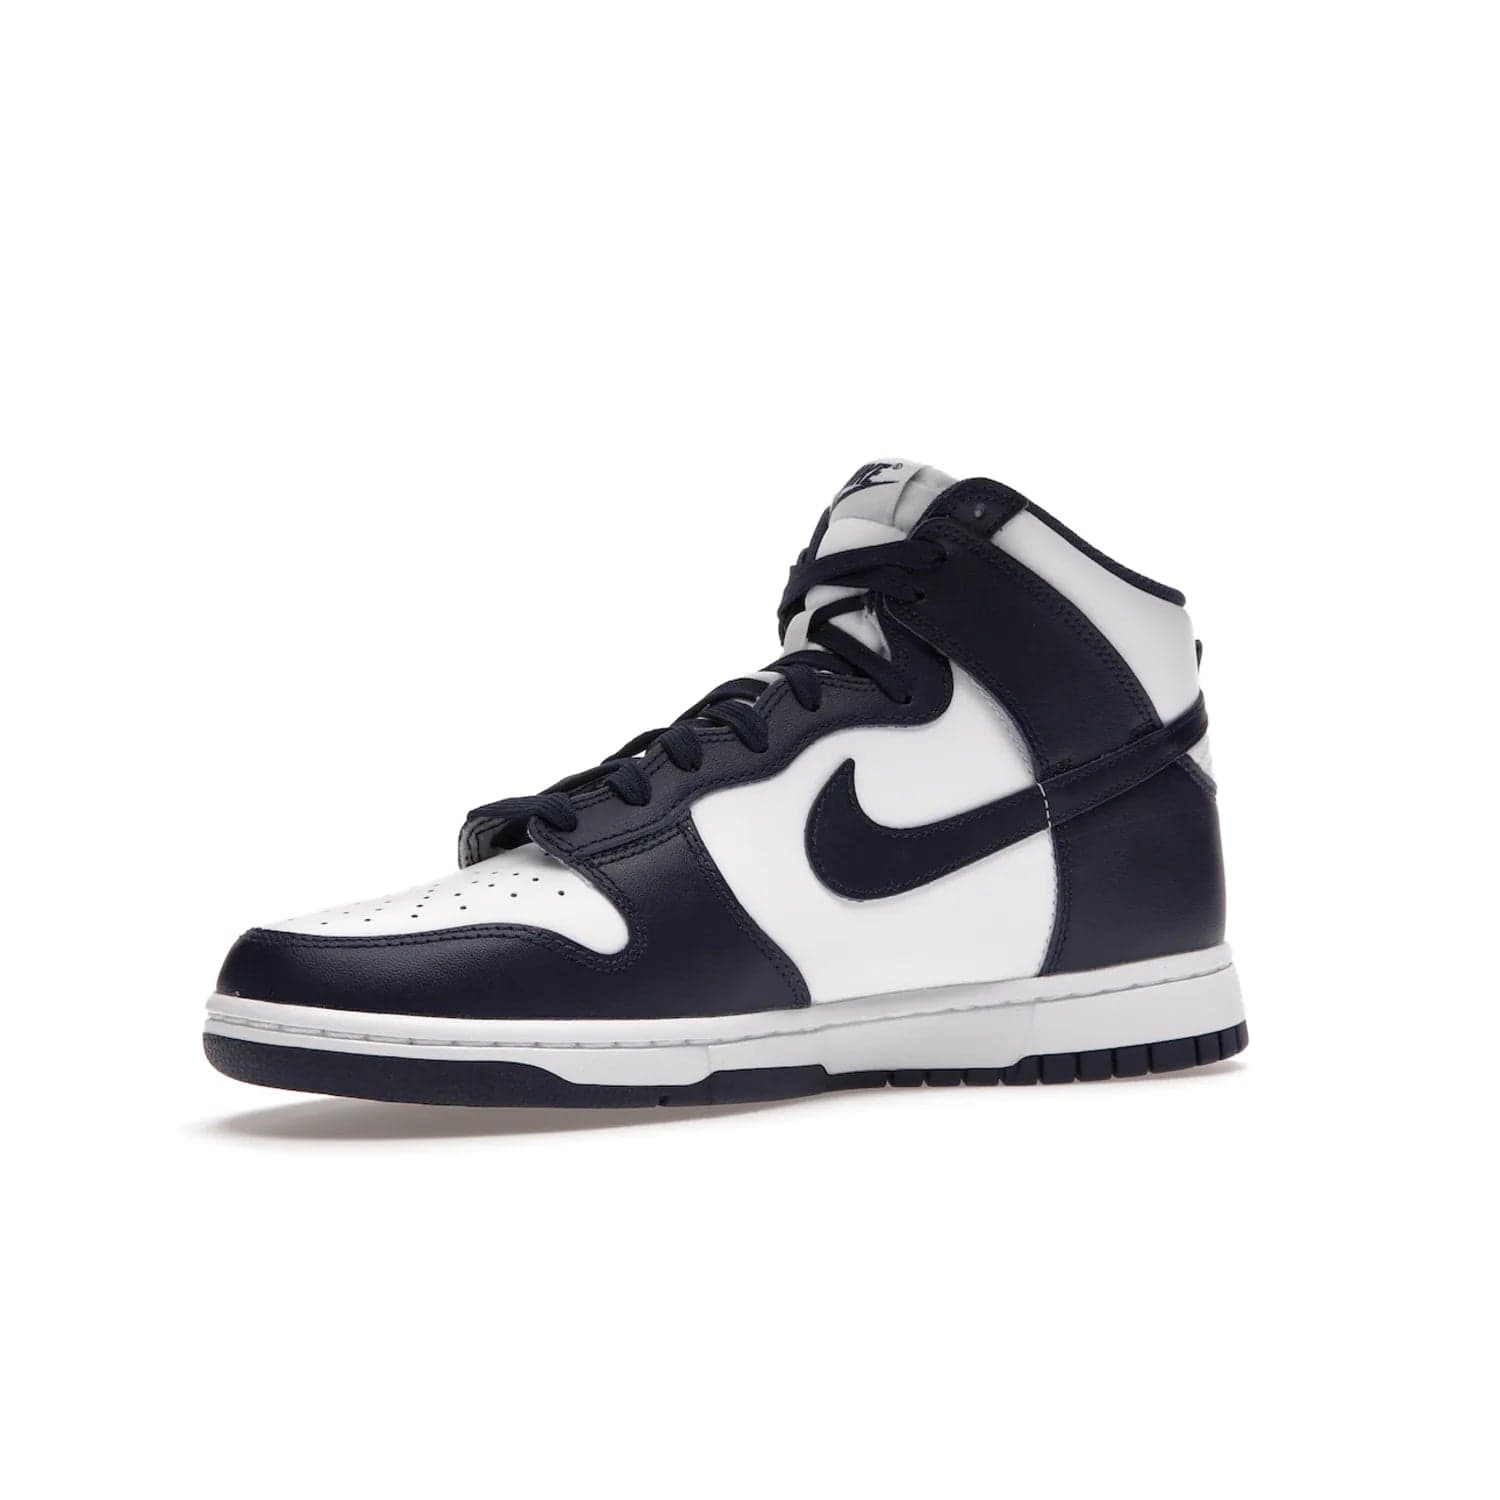 Nike Dunk High Championship Navy - Image 16 - Only at www.BallersClubKickz.com - Classic athletic style meets striking color-blocking on the Nike Dunk High Championship Navy. A white leather upper with Championship Navy overlays creates a retro look with a woven tongue label and sole. Unleash your inner champion with the Nike Dunk High Championship Navy.